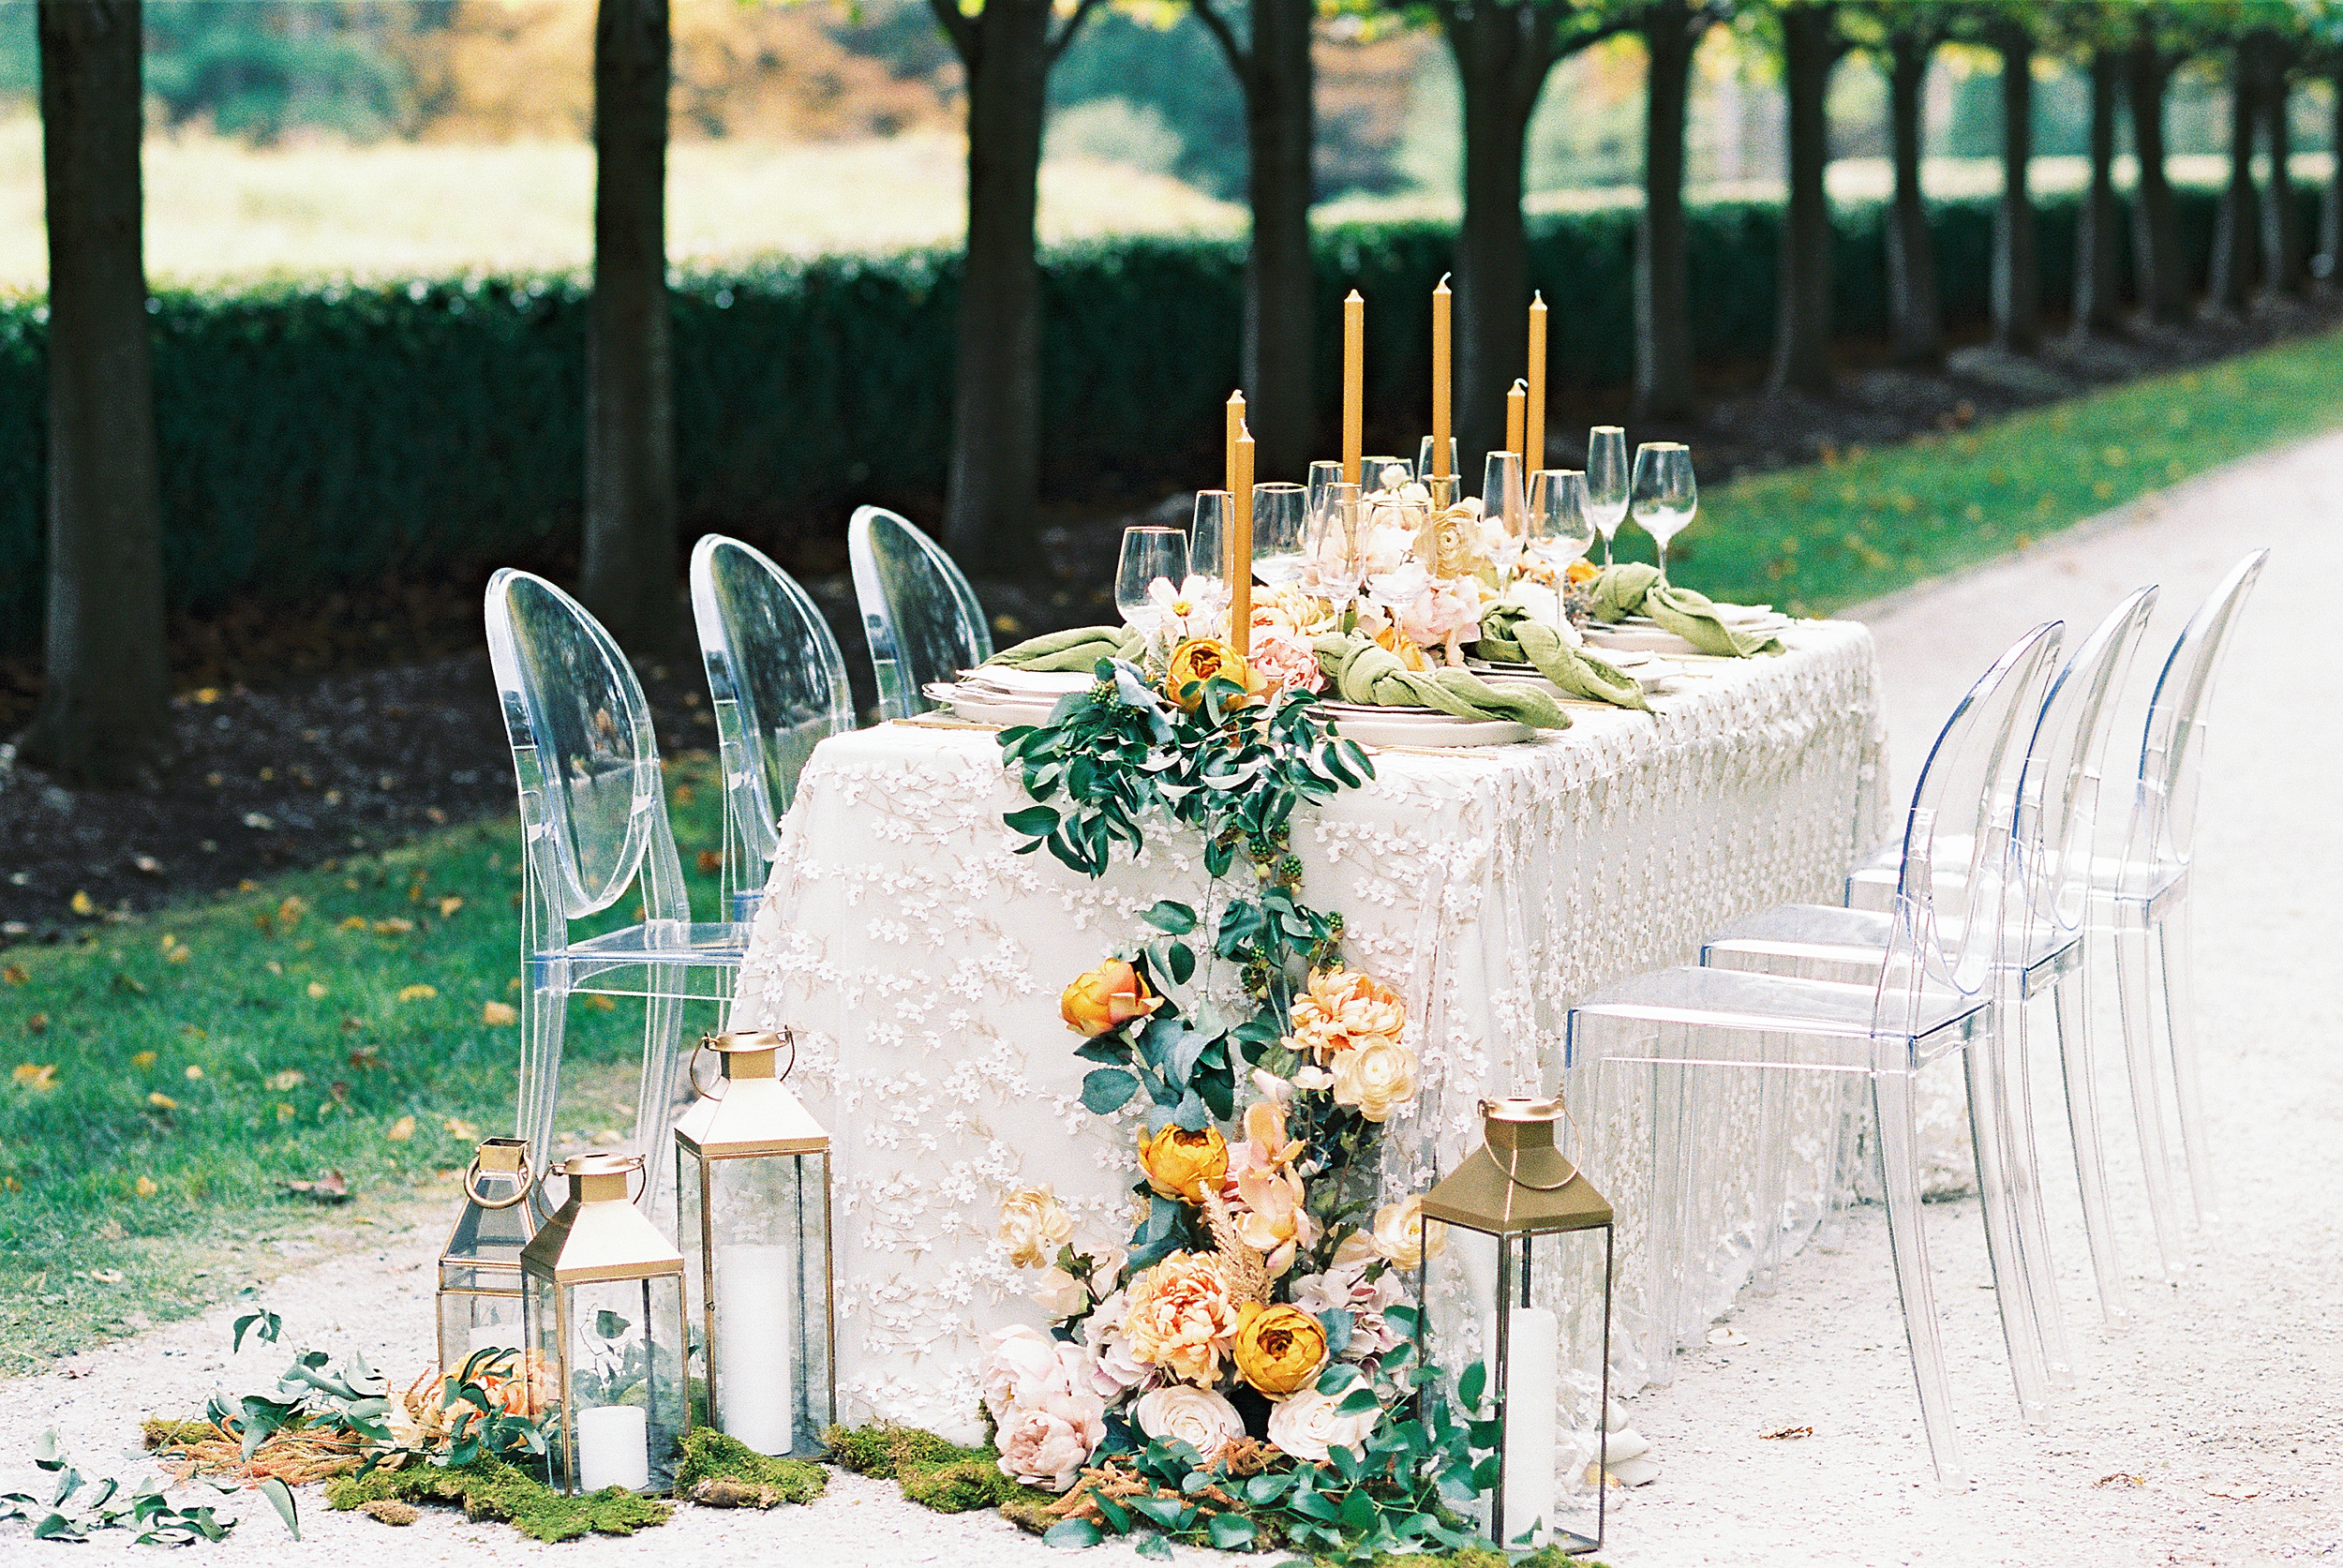 Wedding inspiration at The Mount in Lenox MA with clear acrylic chairs, lace overlay, and lush tablescape